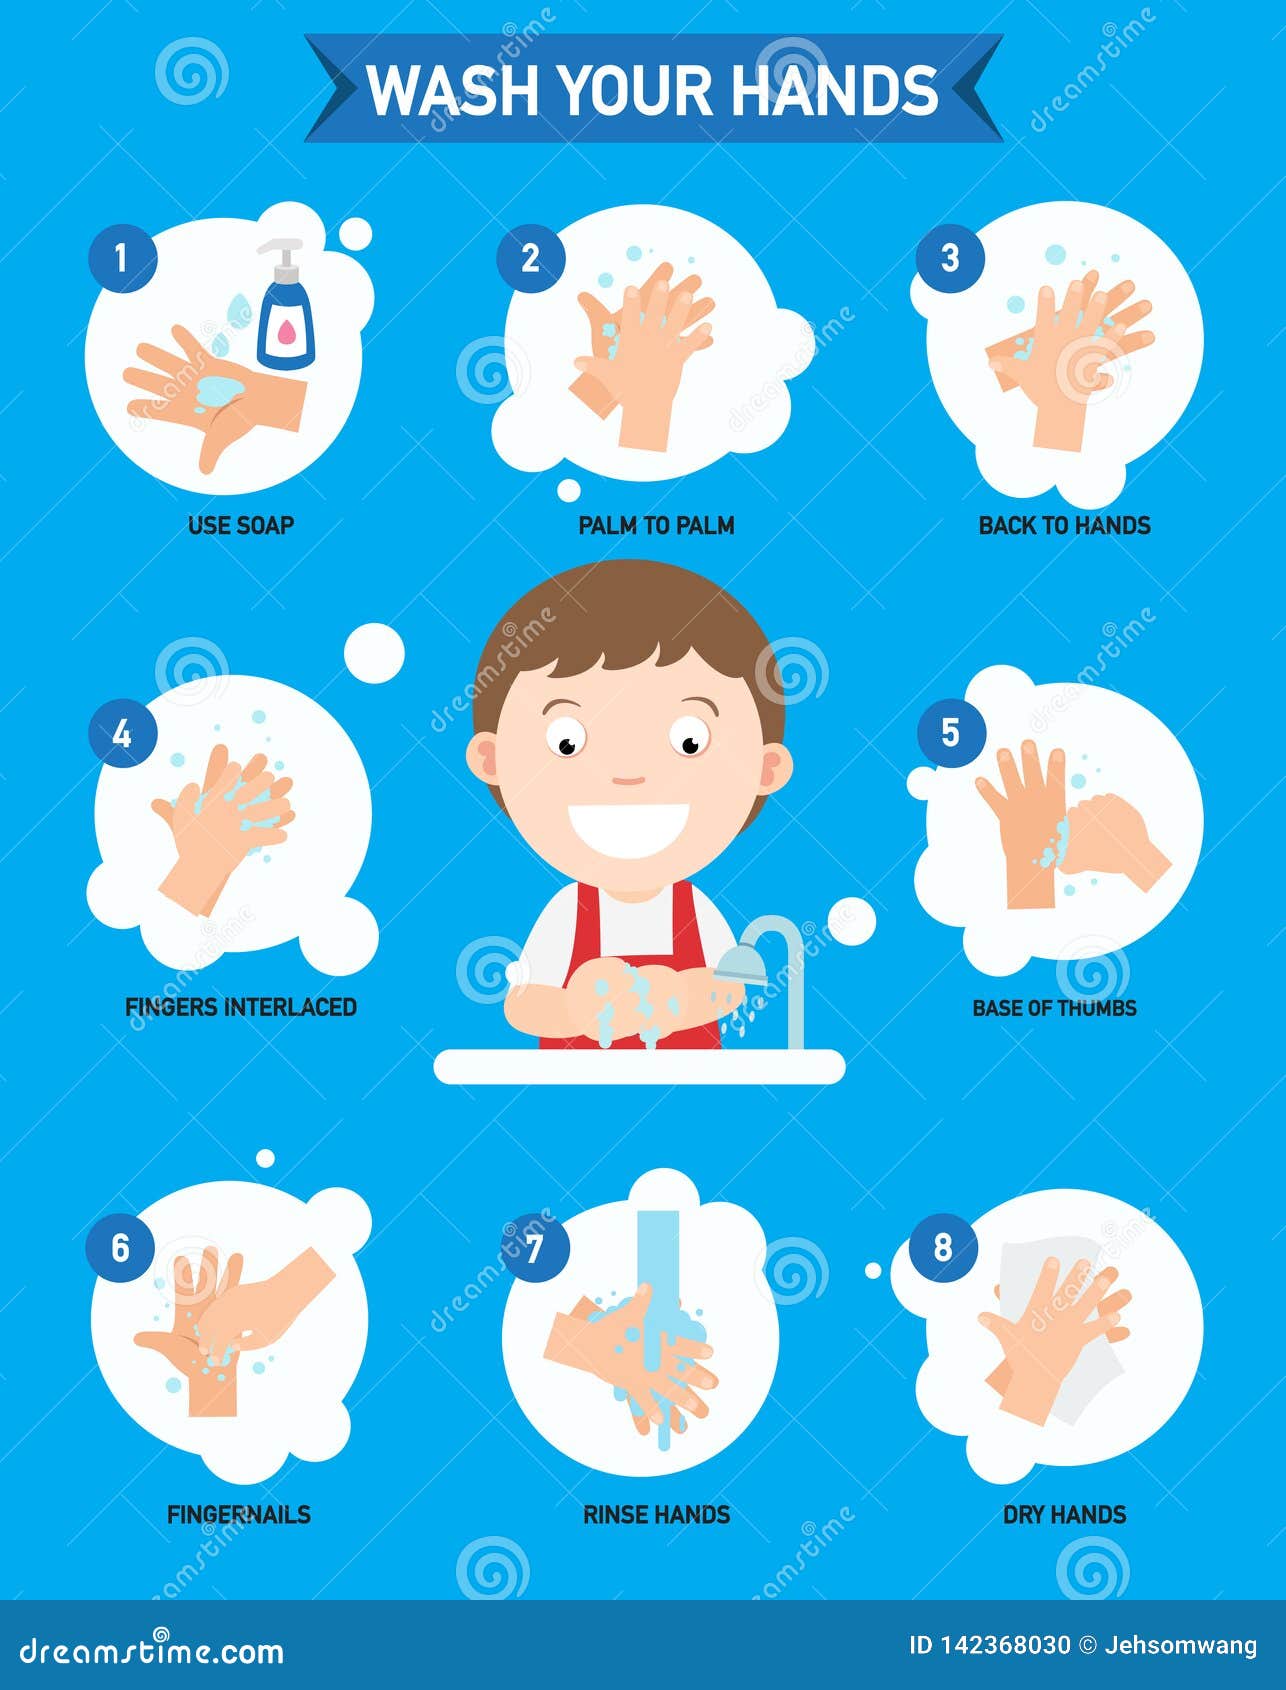 how to washing hands properly infographic